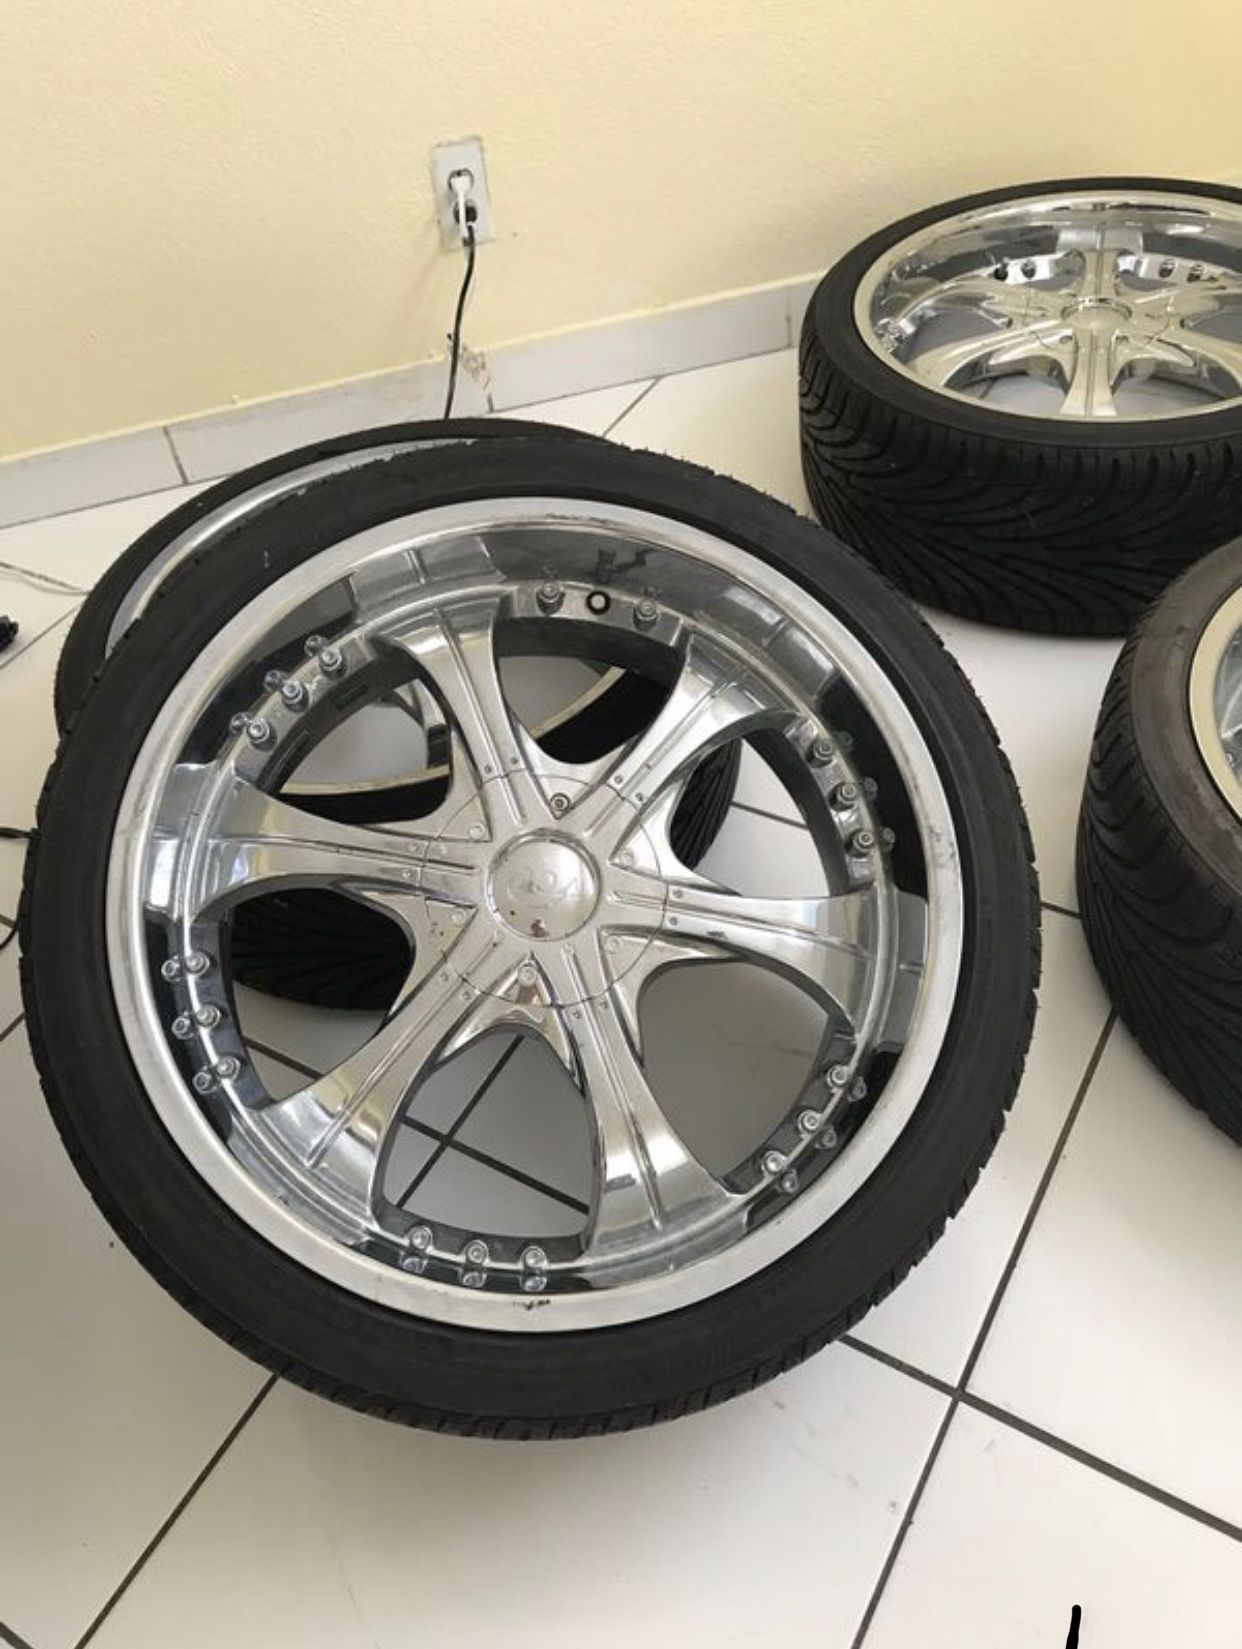 VCT Scarface rims 20 inches with low profile tires.